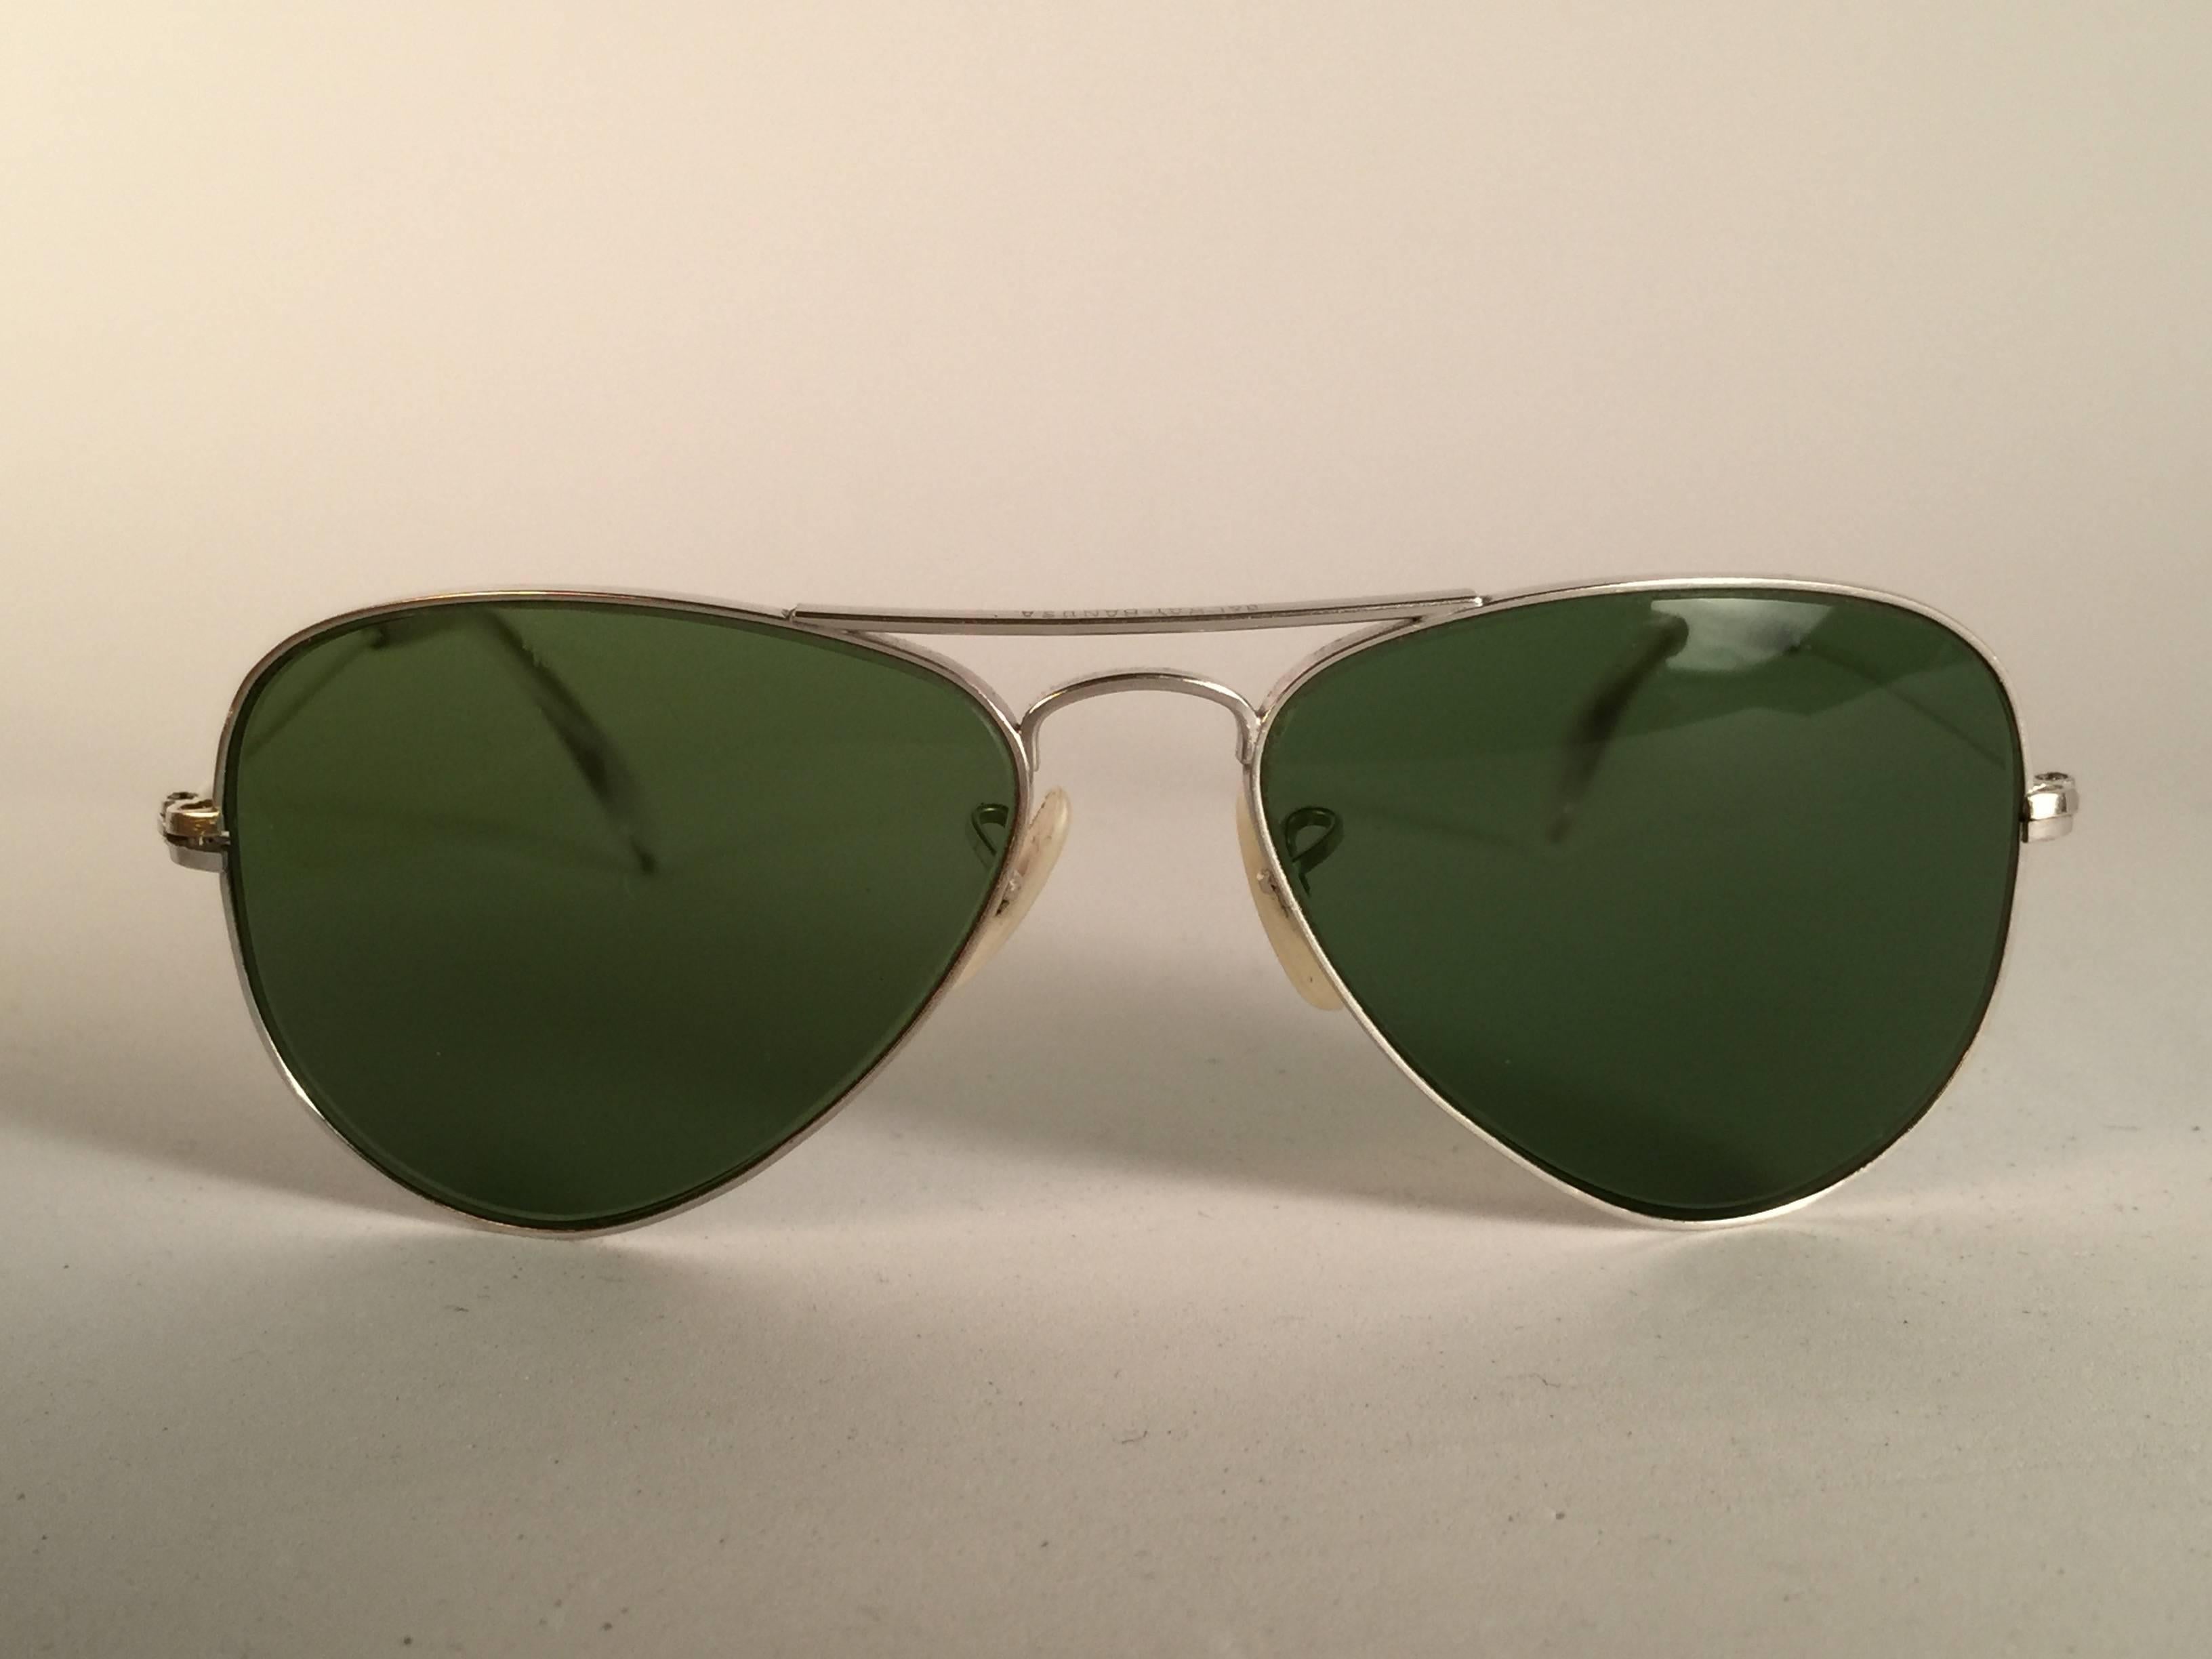 New Super special vintage Ray Ban Aviator 12K filled frame with B&L G15 Grey Lenses in SIZE 52!!  The smallest size available, suitable for children.  Please noticed this item may show minor sign of wear due to storage.
Comes with its original Ray